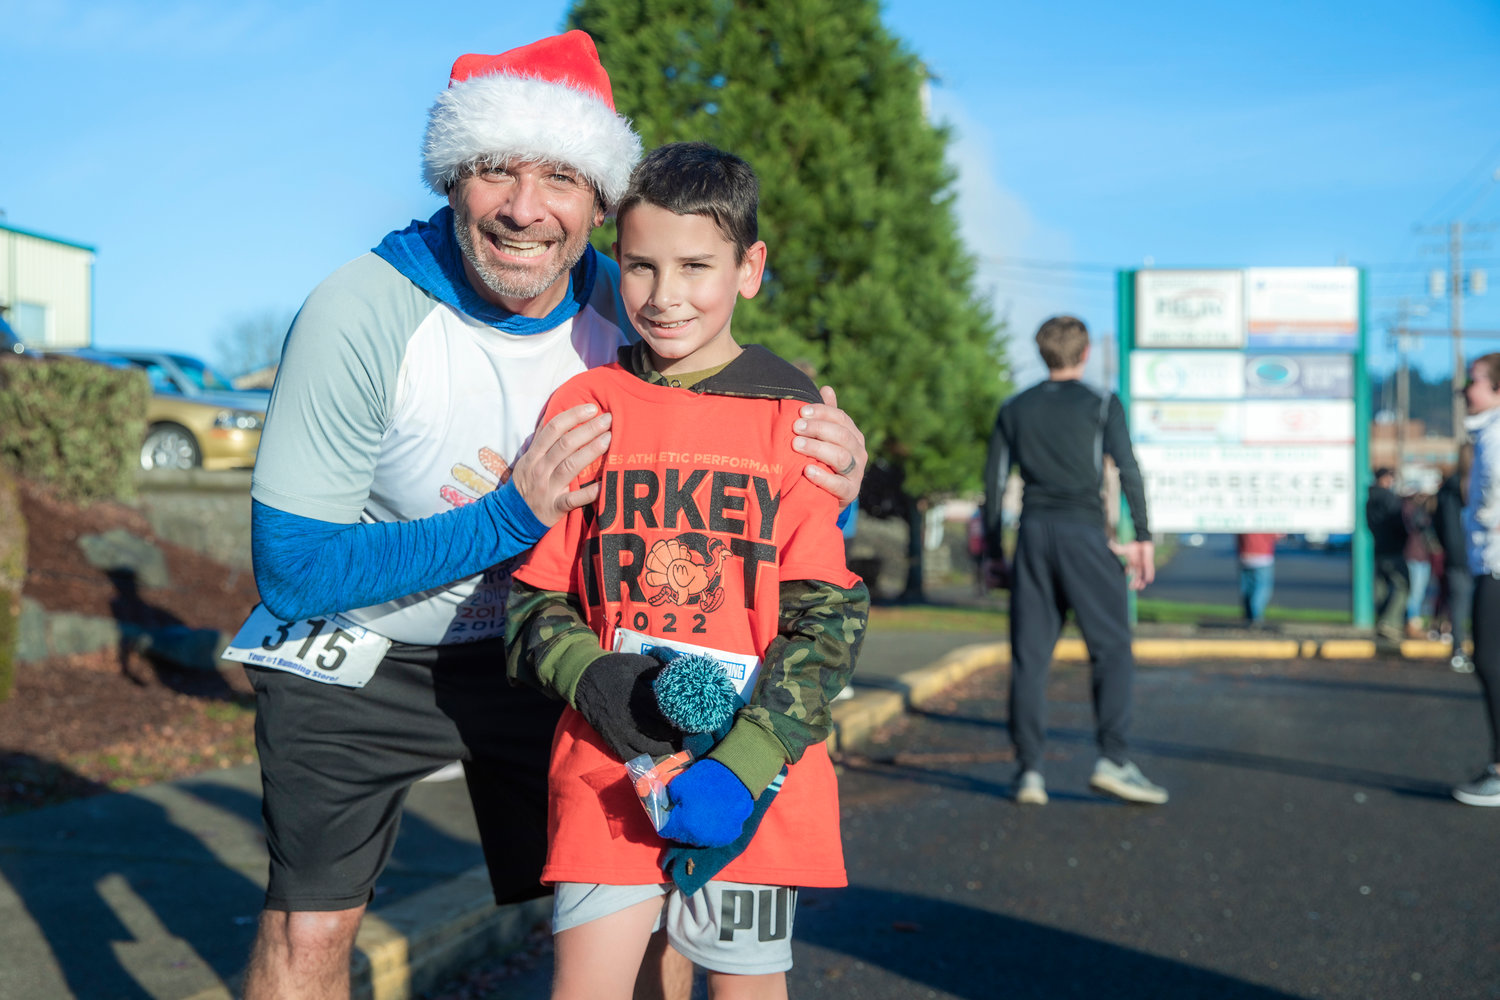 State Rep. Peter Abbarno smiles for a photo with his son Antonio after he was the first 12 and under runner to complete the Turkey Trot 5K Thanksgiving morning outside Thorbeckes in Chehalis.